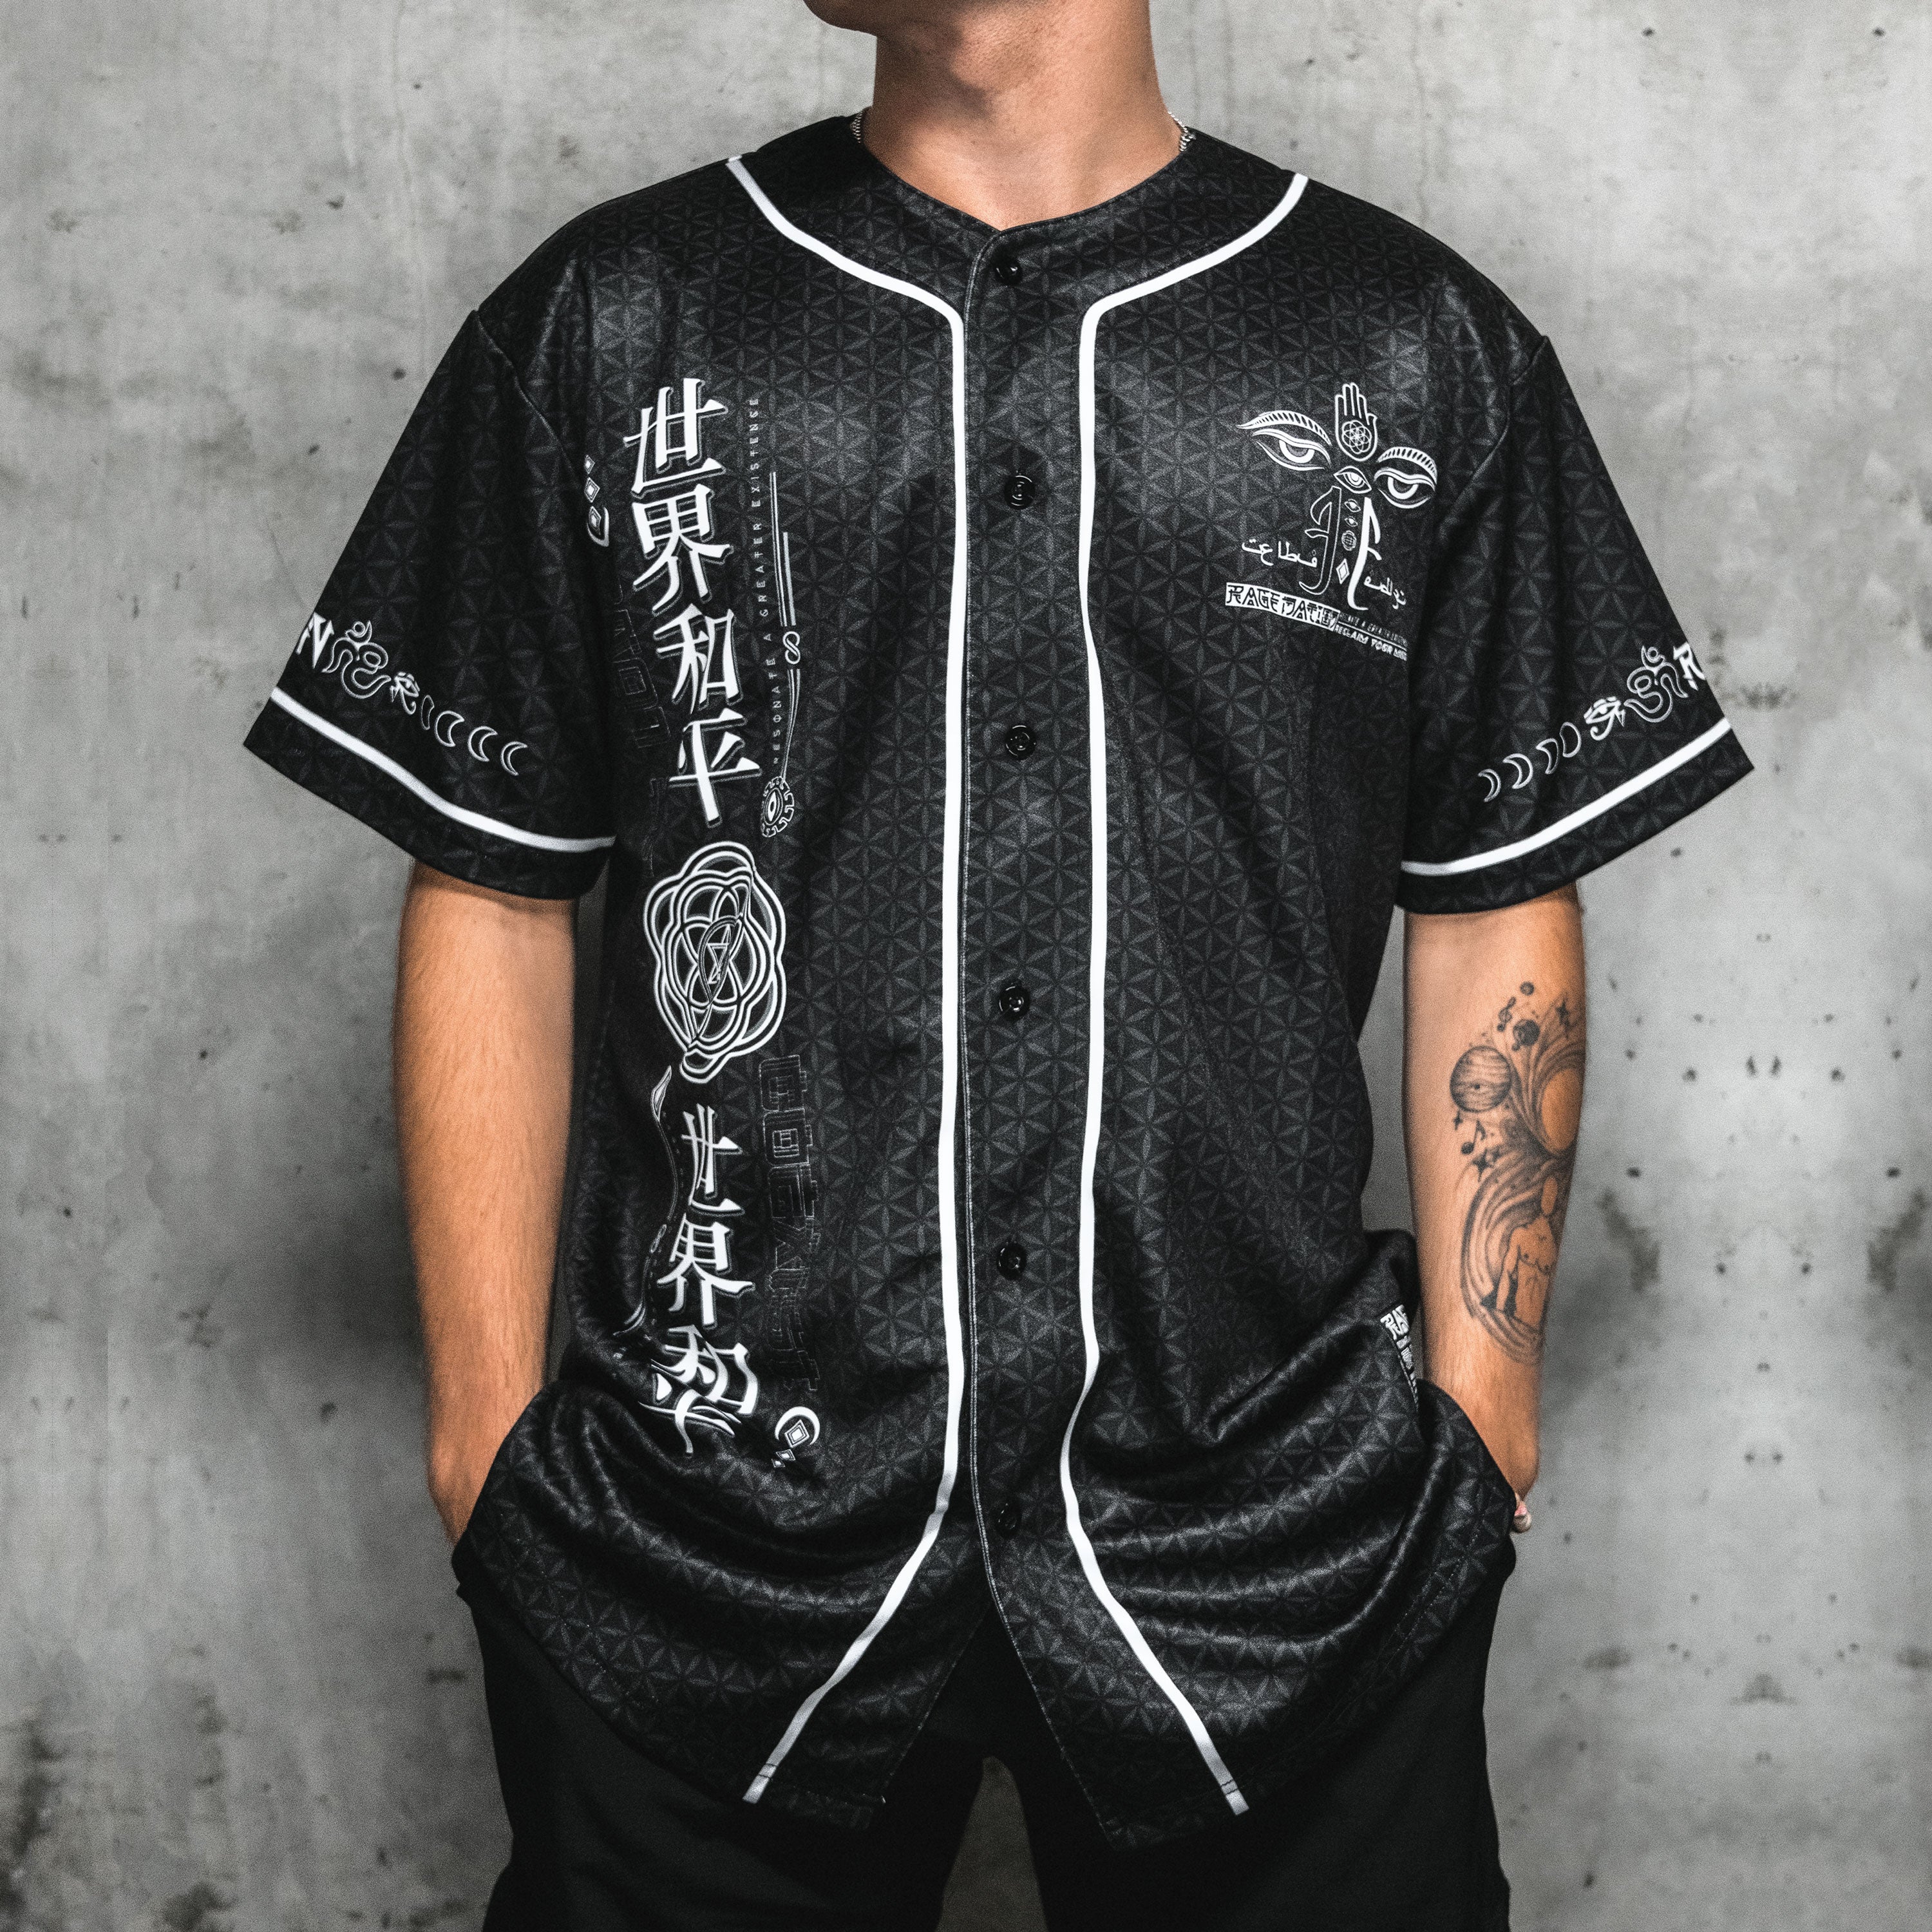 MIND OF LOVE • Sublimated Jersey #1 Jersey 